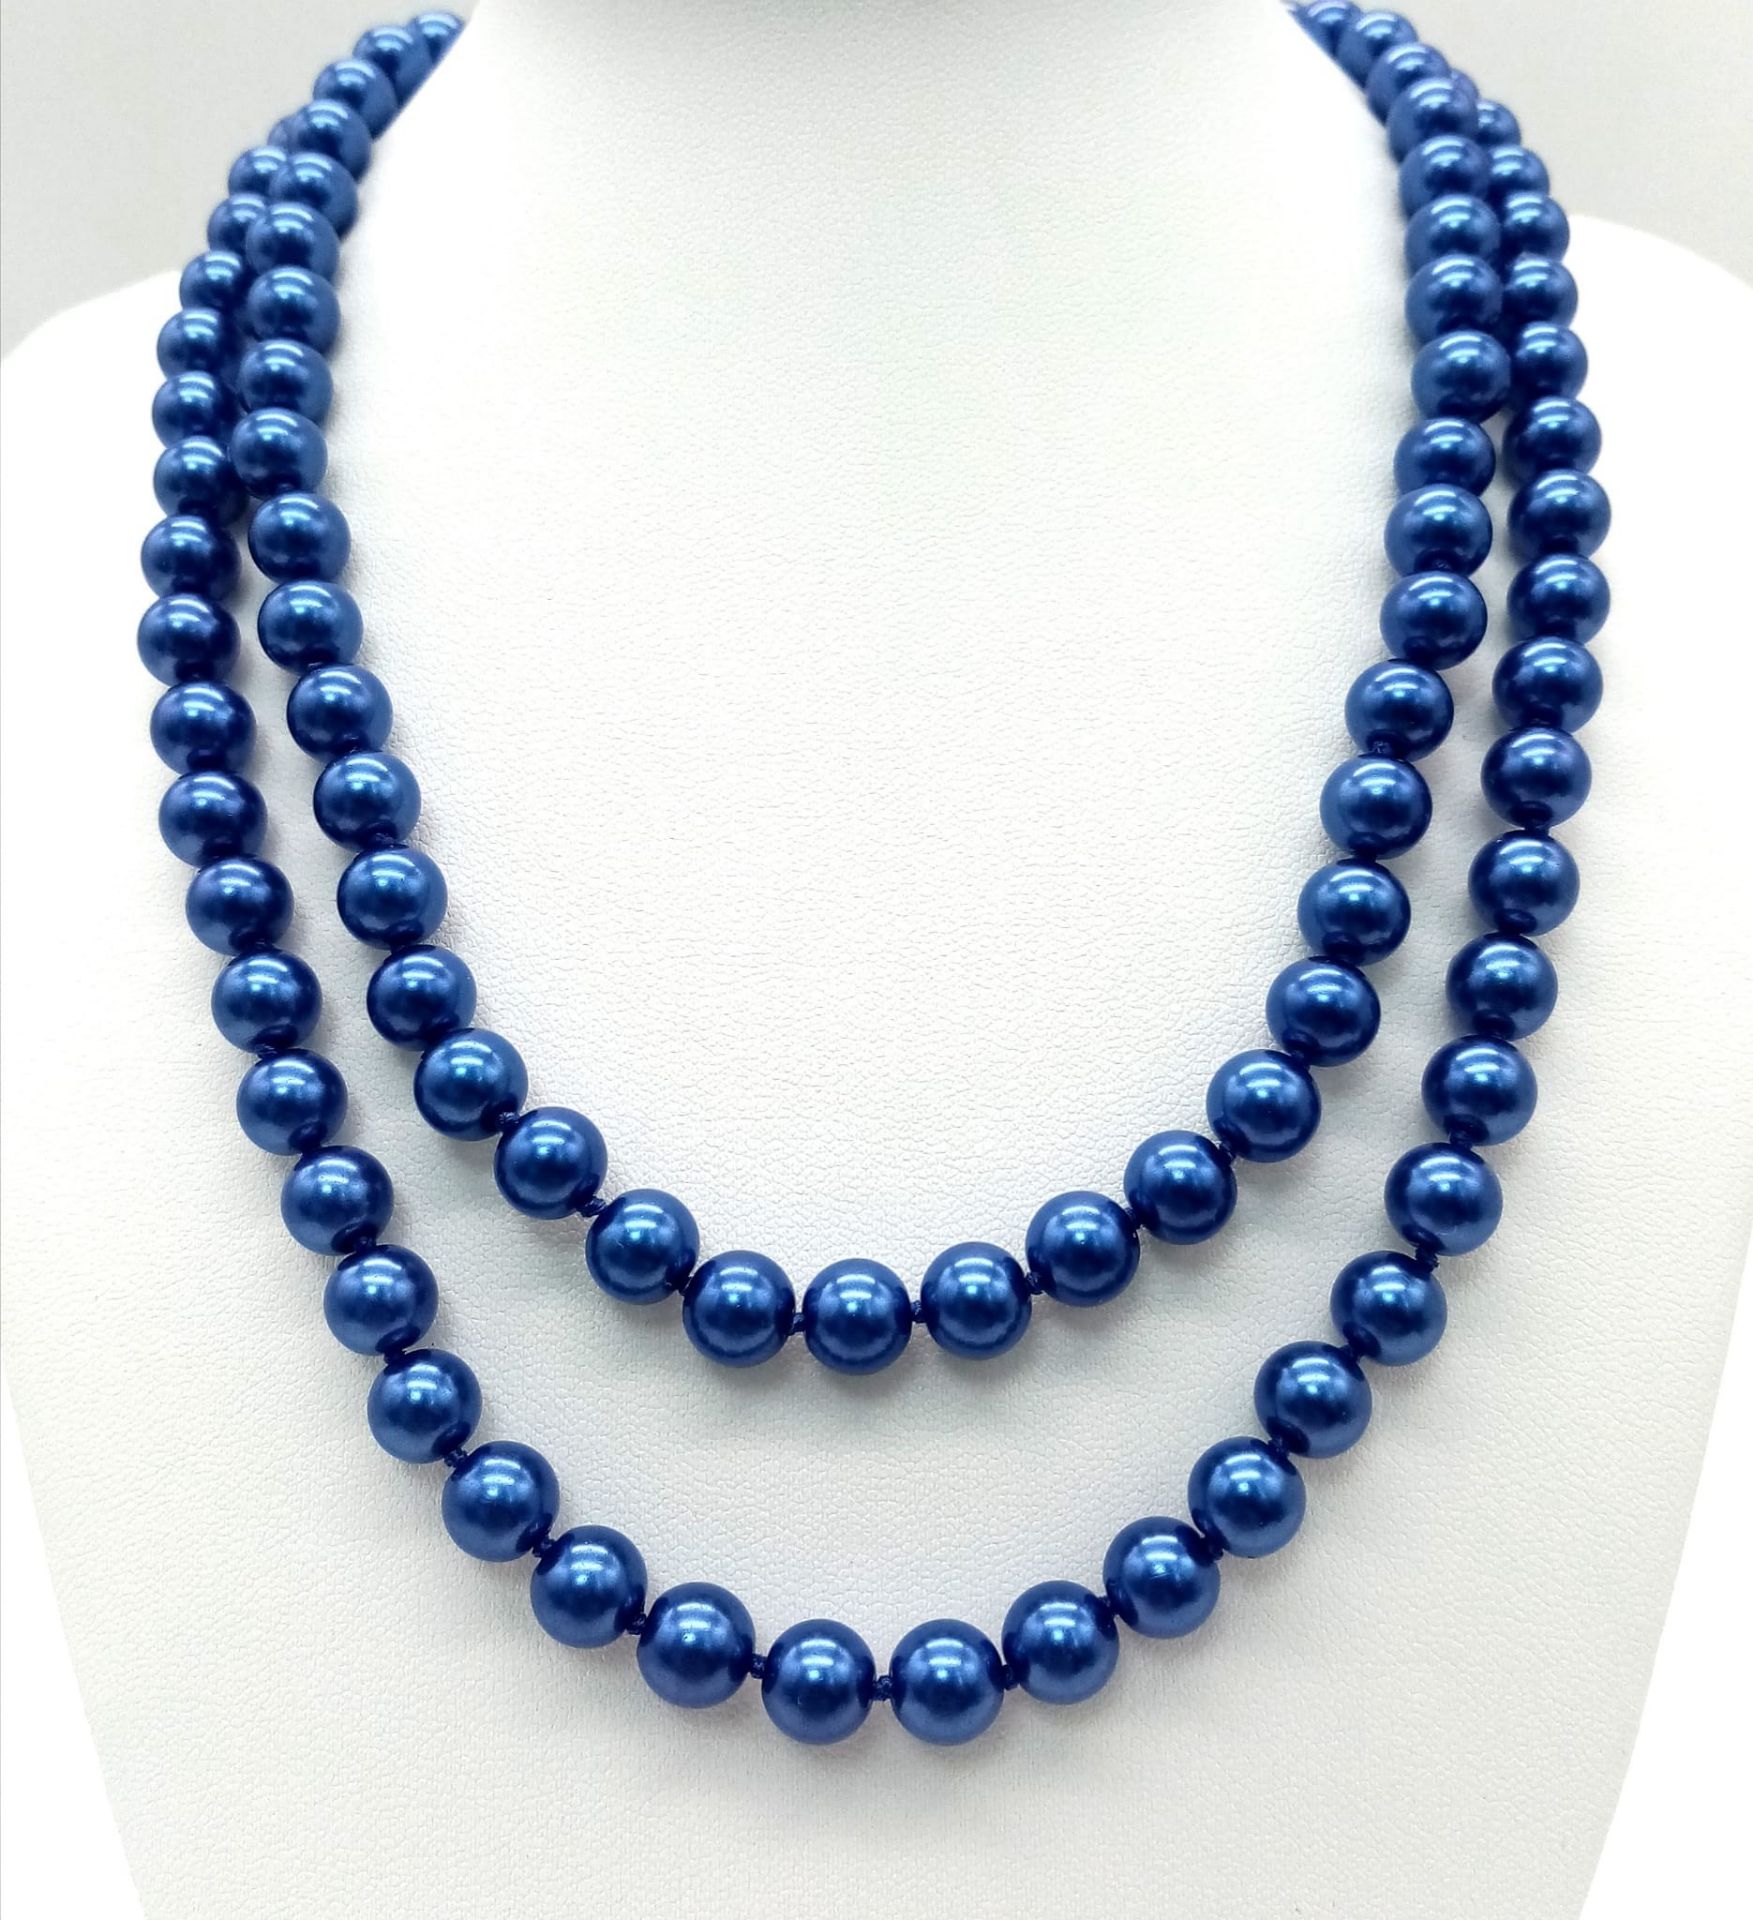 A Matinee Length Metallic Blue South Sea Pearl Shell Necklace. Beads - 8mm. Necklace length - 88cm.